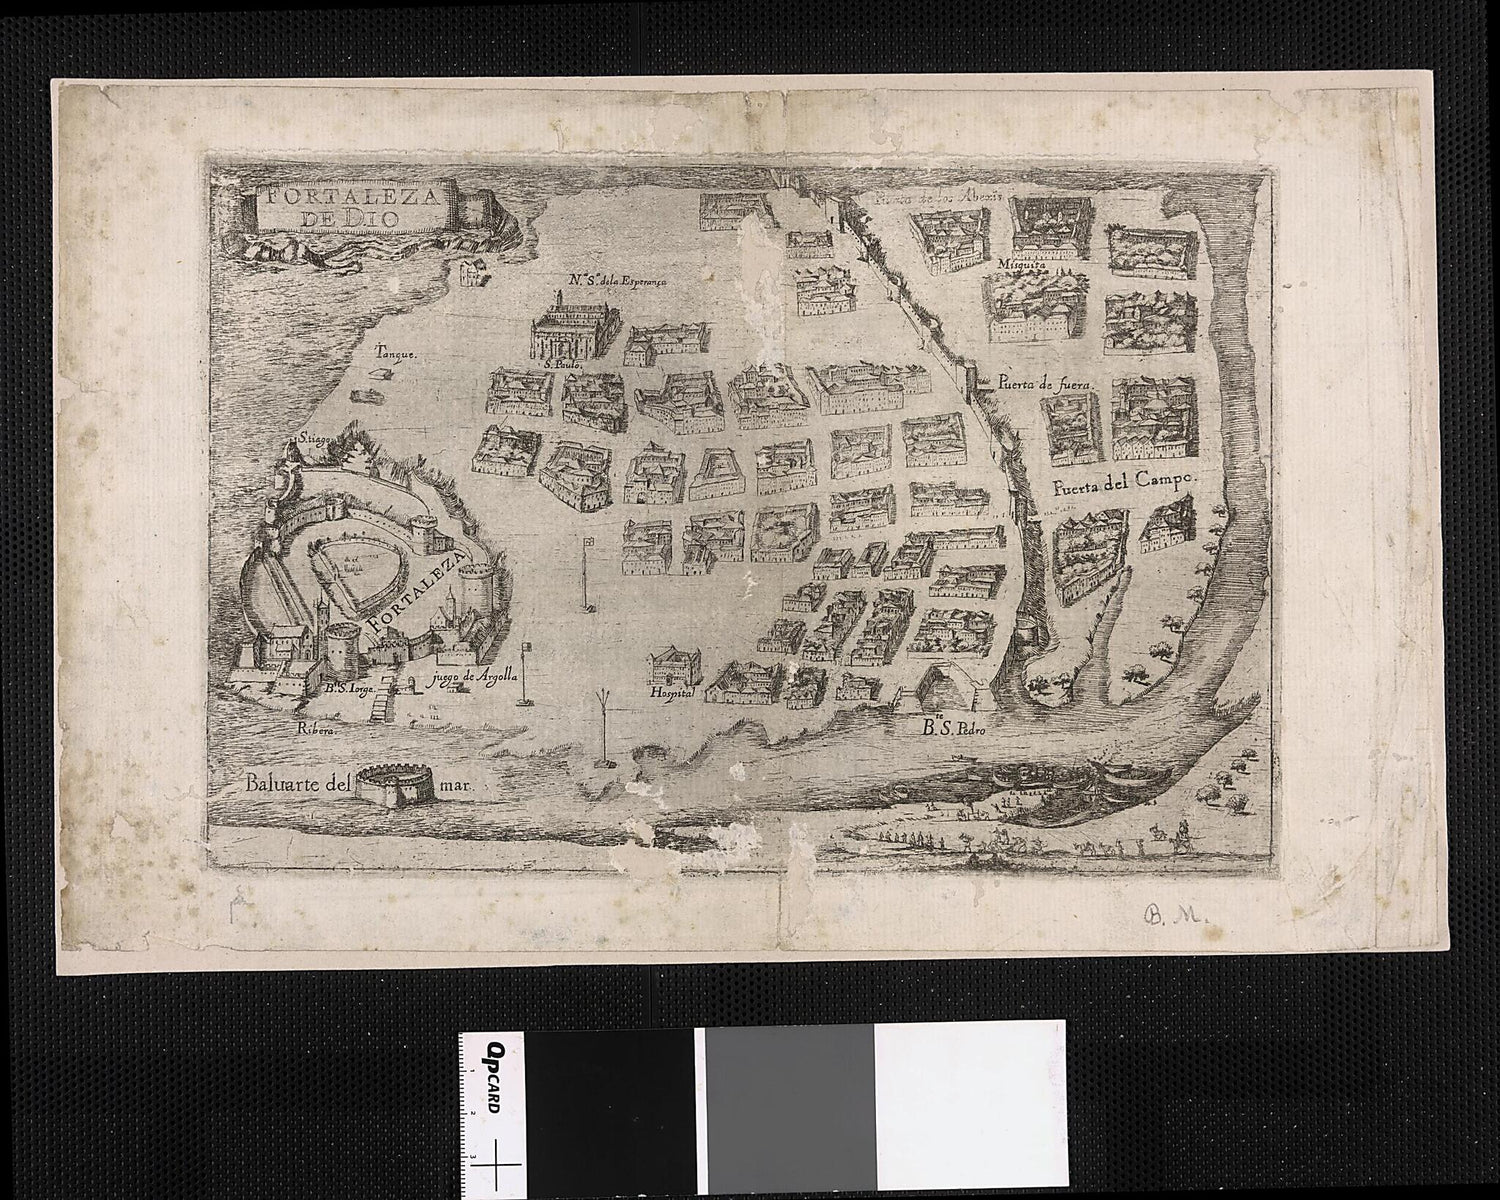 This old map of Fortress of Dio: Plans of Plazas and Forts of Portuguese Possessions In Asia and Africa. (Fortaleza De Dio: Plantas De Praças E Fortes De Possessões Portuguesas Na Ásia E África) from 1600 was created by  in 1600